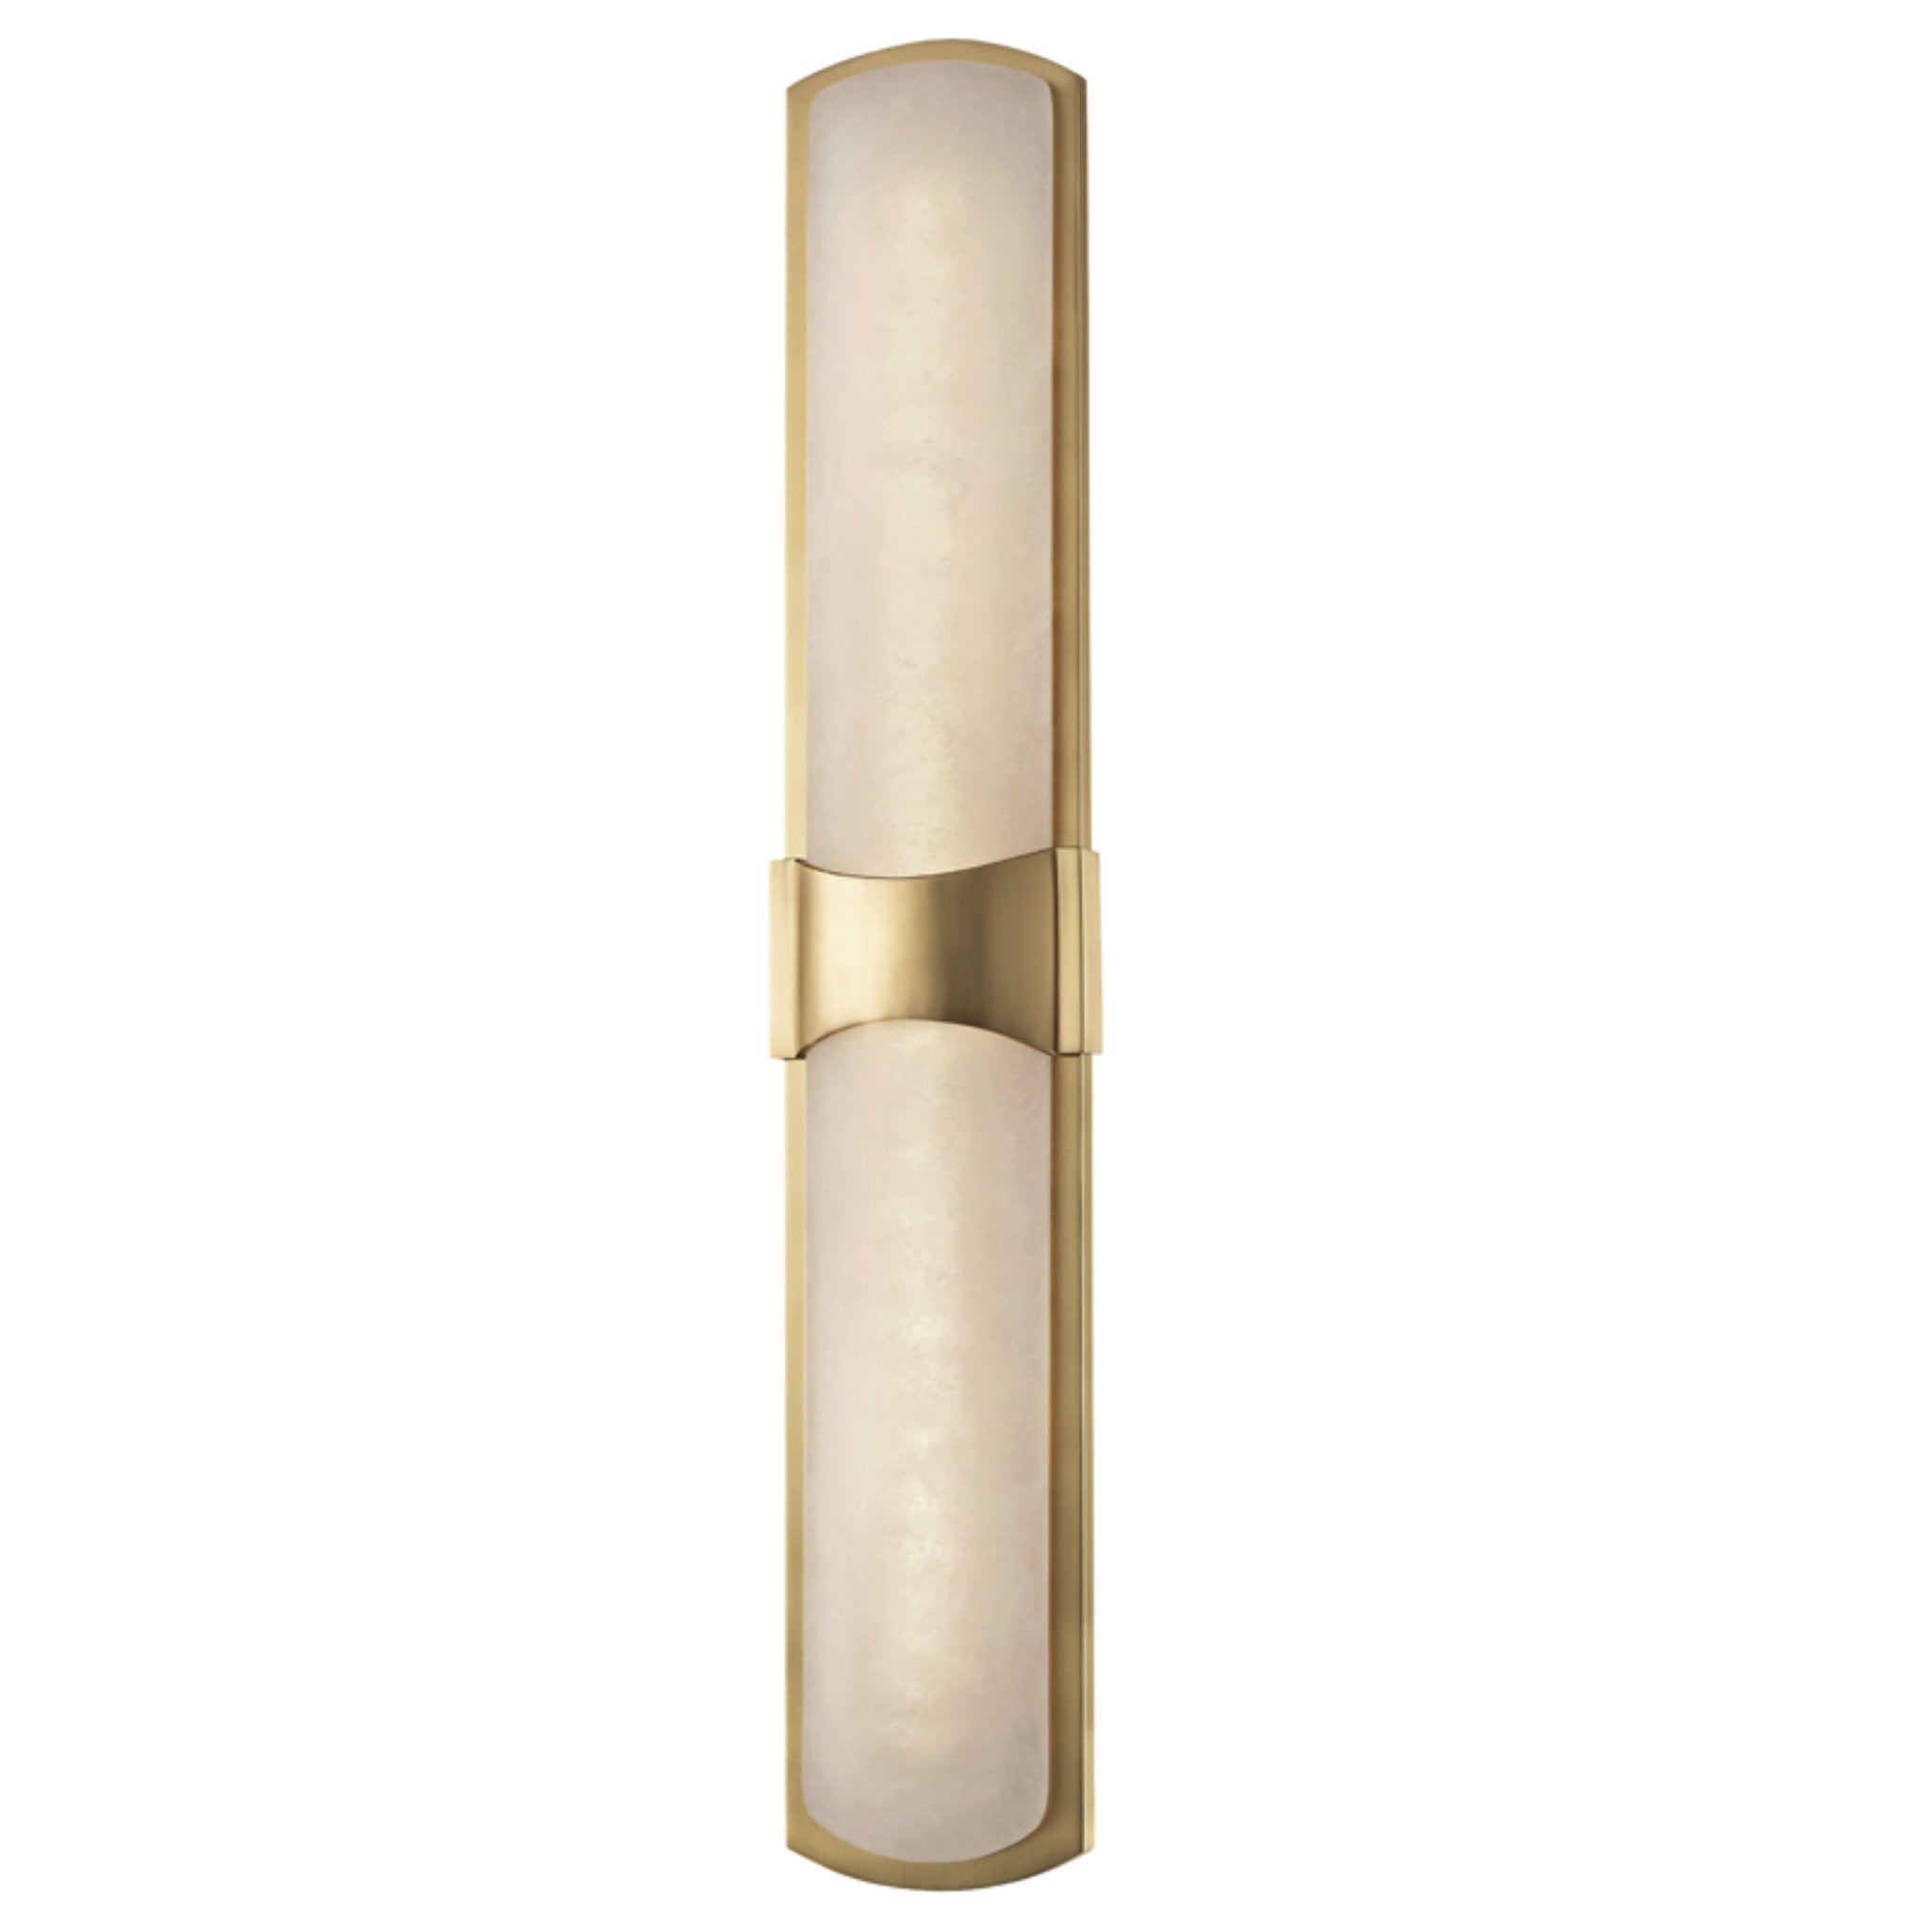 Valencia 1 Light Wall Sconce in Aged Brass